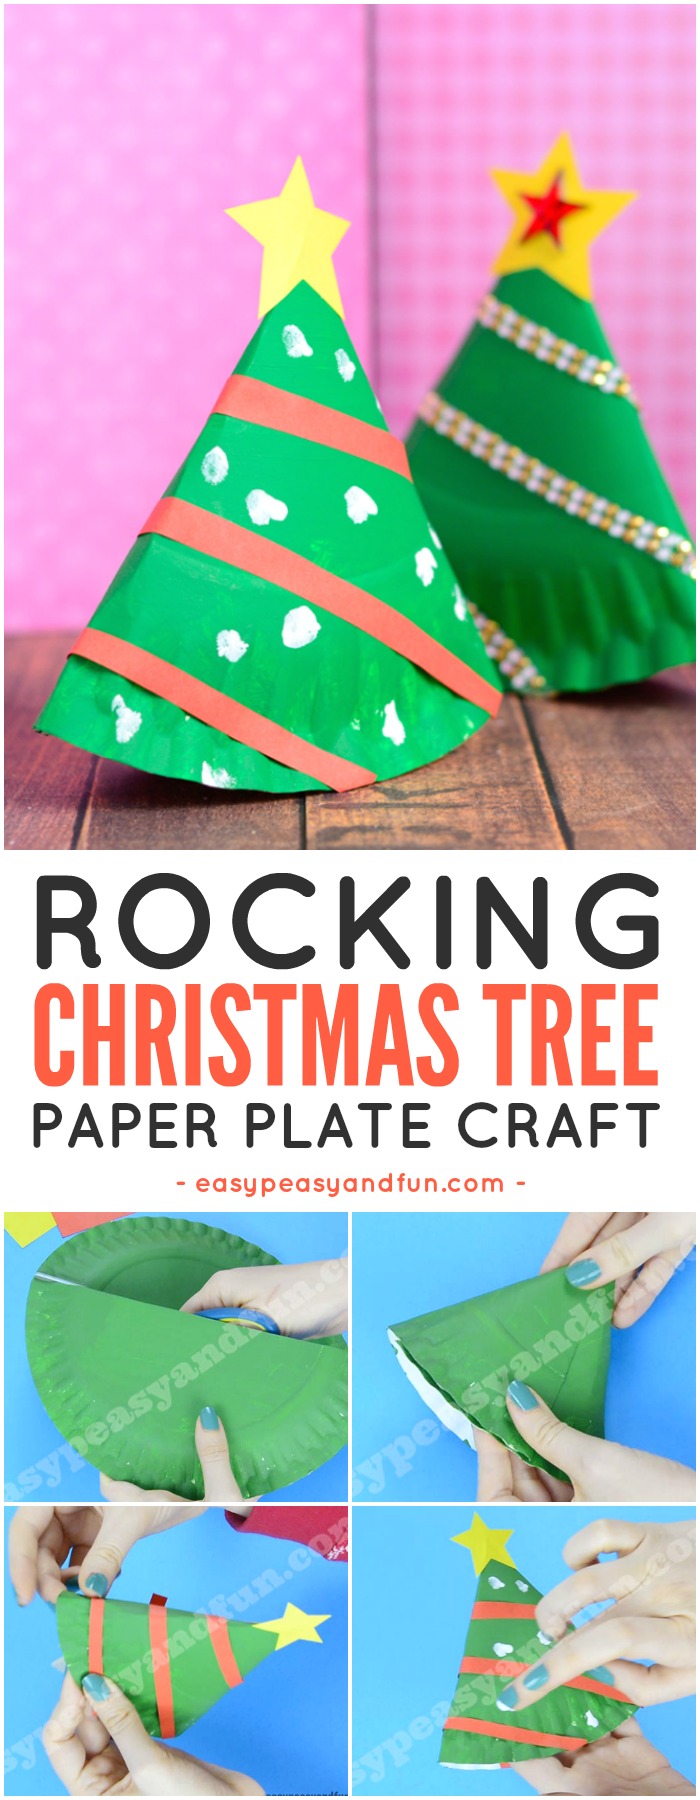 Rocking Paper Plate Christmas Tree Craft for Kids. Fun Christmas craft idea to do with kids.